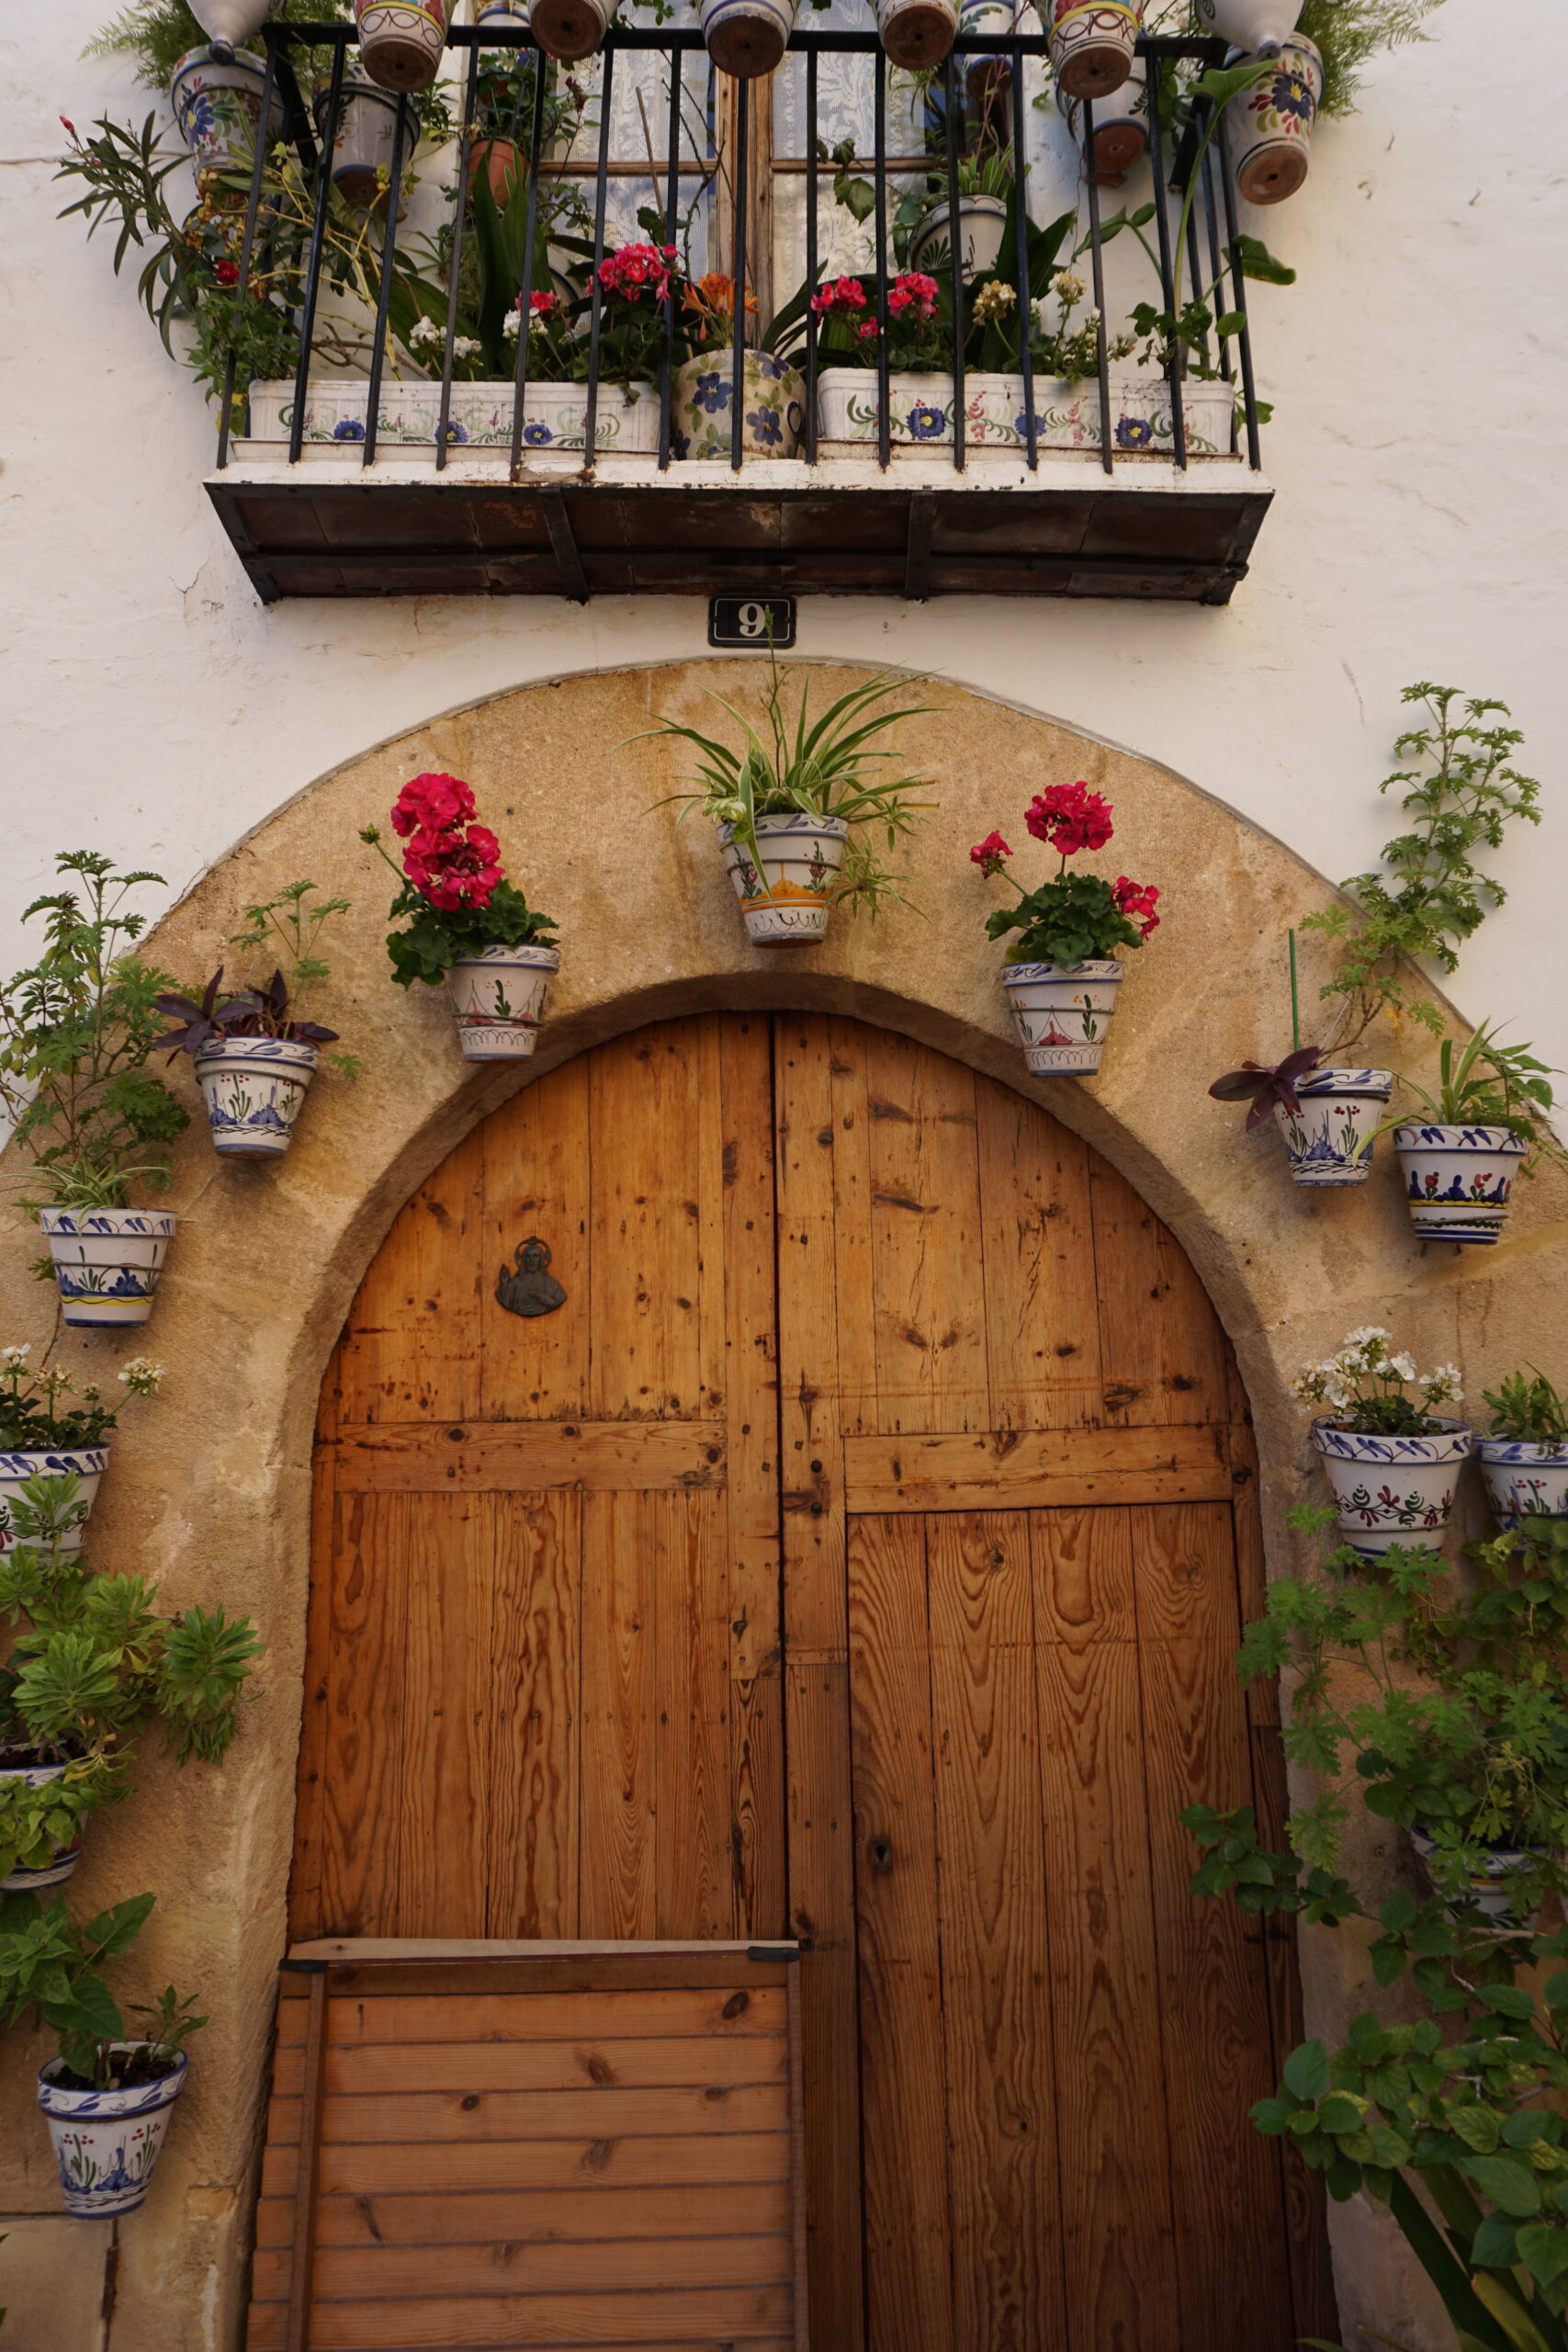 Rounded wooden door lined with flowers in Javea Spain